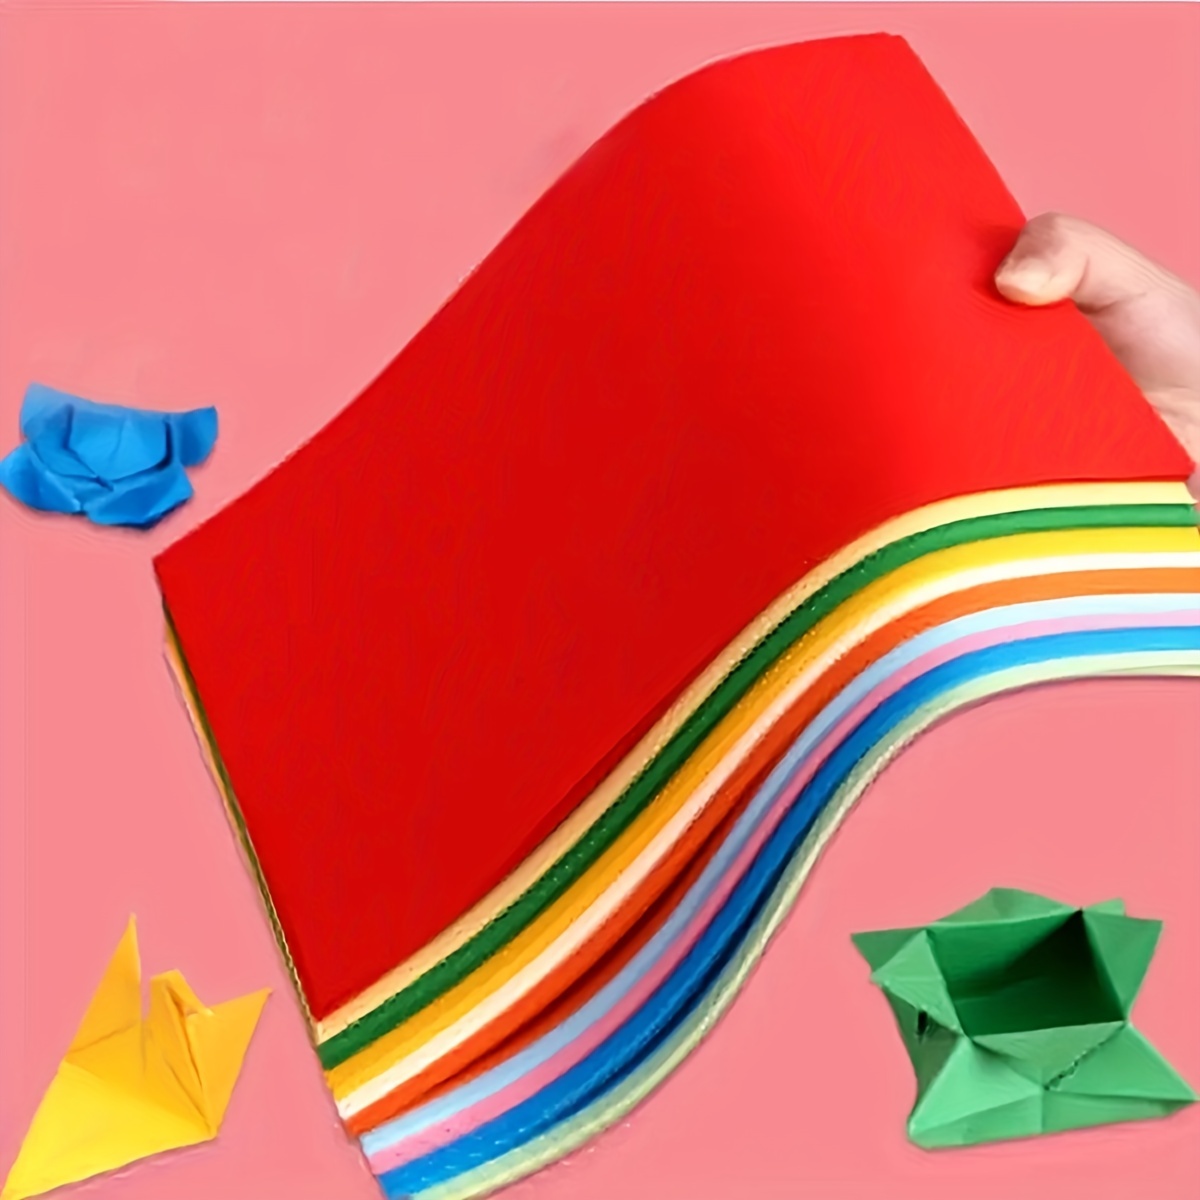 Construction Paper PNG - stack-of-construction-paper  pack-of-construction-paper construction-paper-chain  colored-construction-paper construction-paper-crafts  construction-paper-cutouts dark-red-construction-paper  colored-construction-paper-art cities